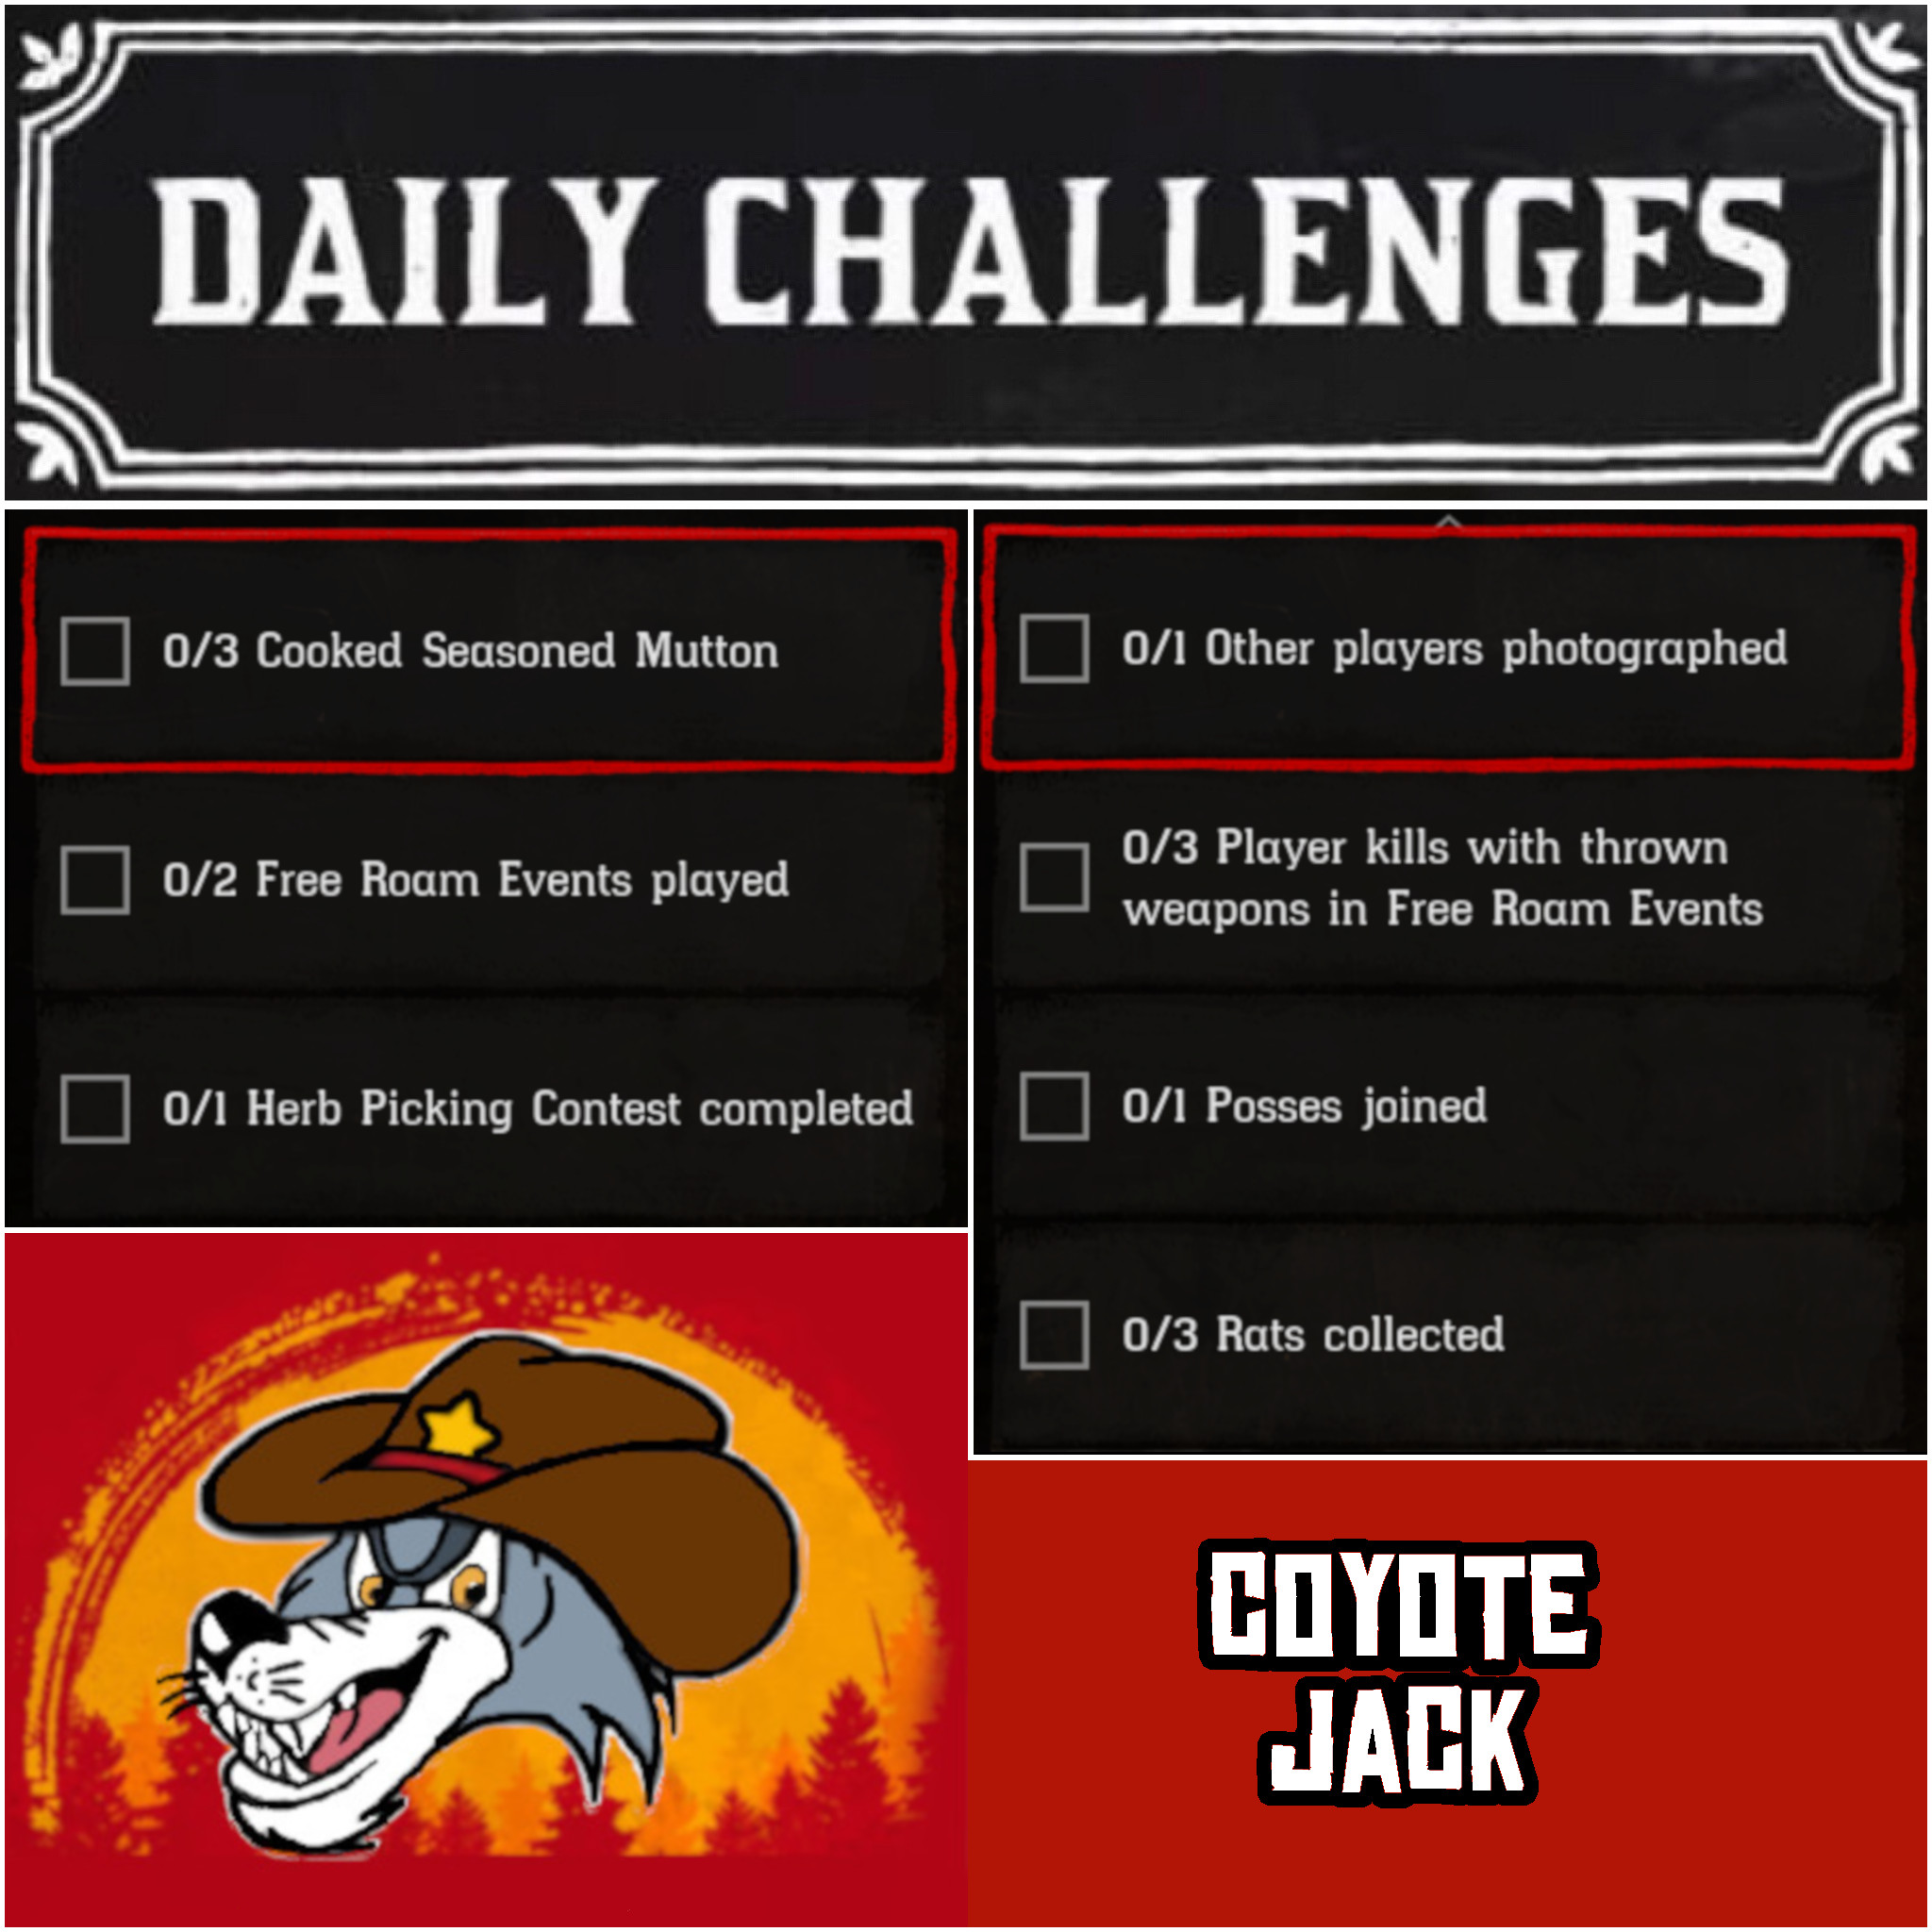 You are currently viewing Thursday 14 January Daily Challenges